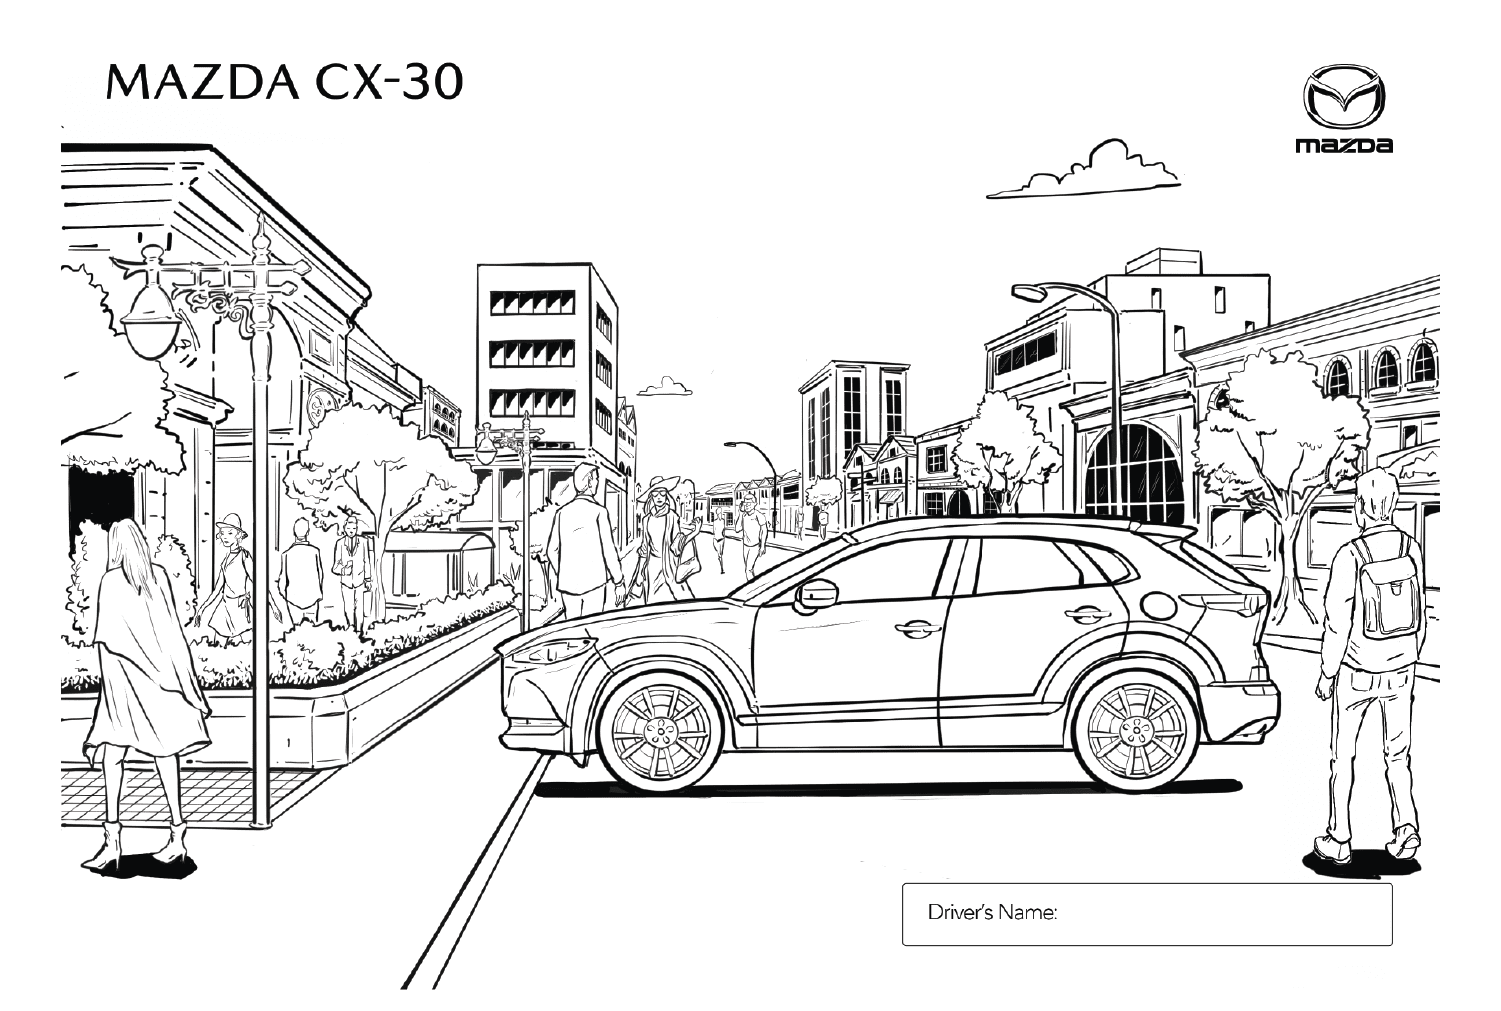 Mazda CX-30 Coloring Page from Mazda